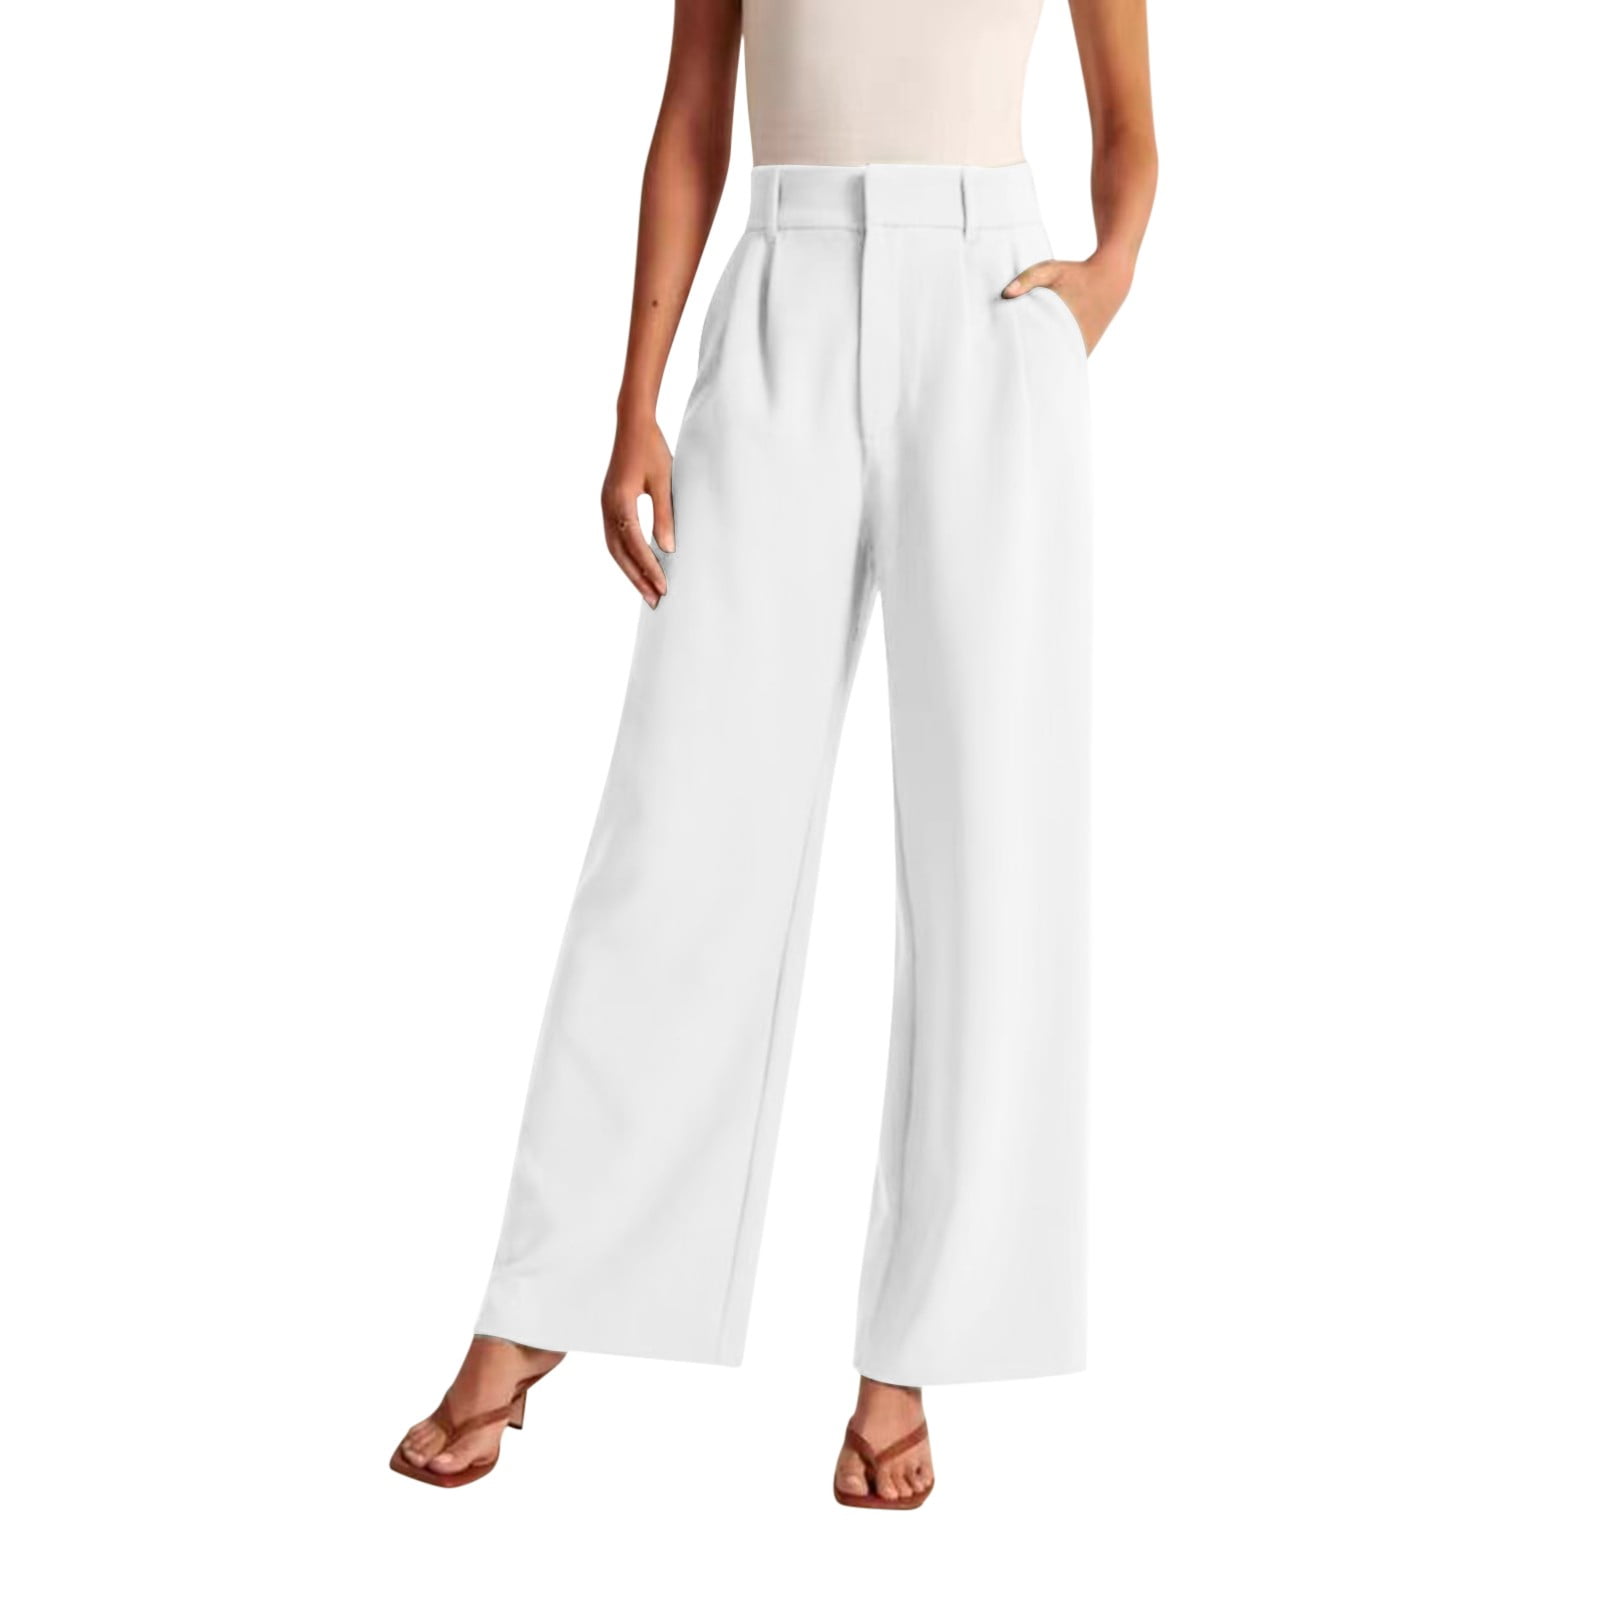 18 Flattering High-Waisted Trousers That Aren't Paper Bag Waist Pants |  HuffPost Life